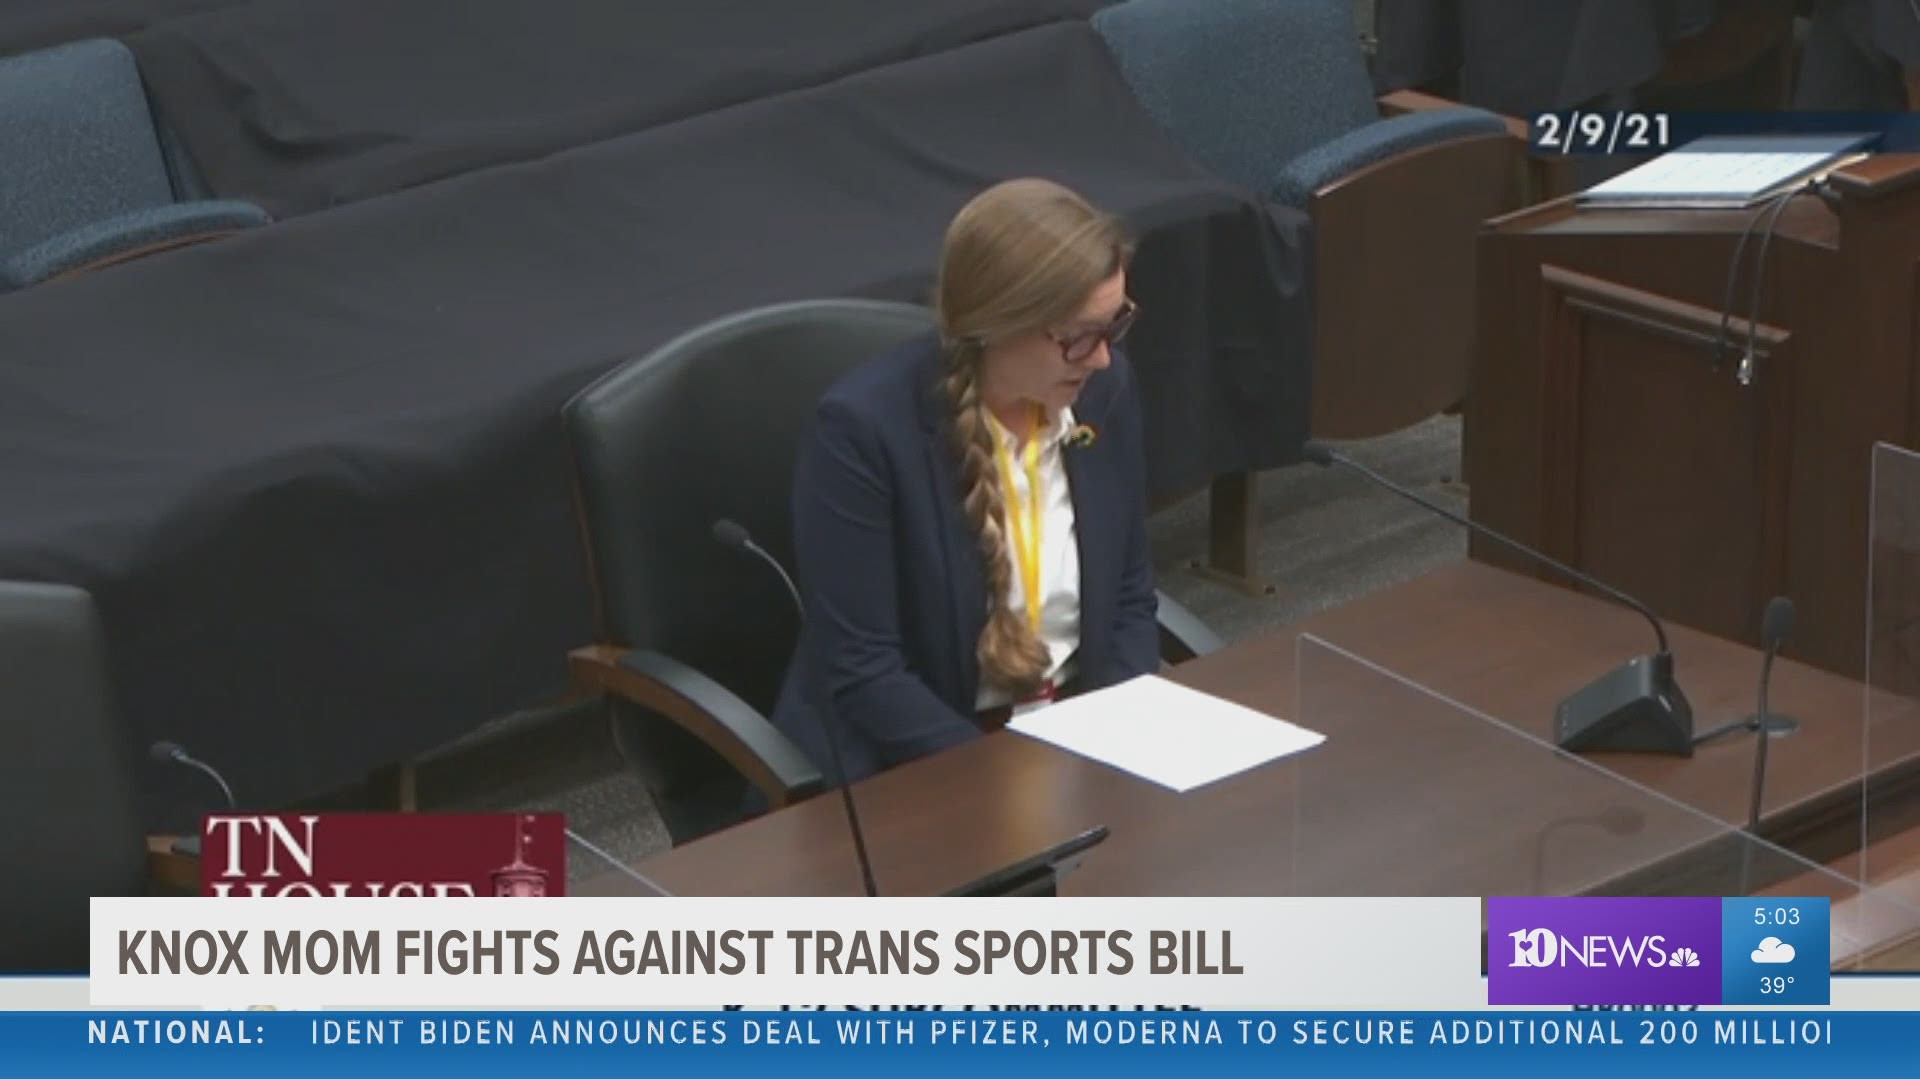 A proposed bill would ban transgender athletes in public schools from playing on the sports team that aligns with their gender identity.